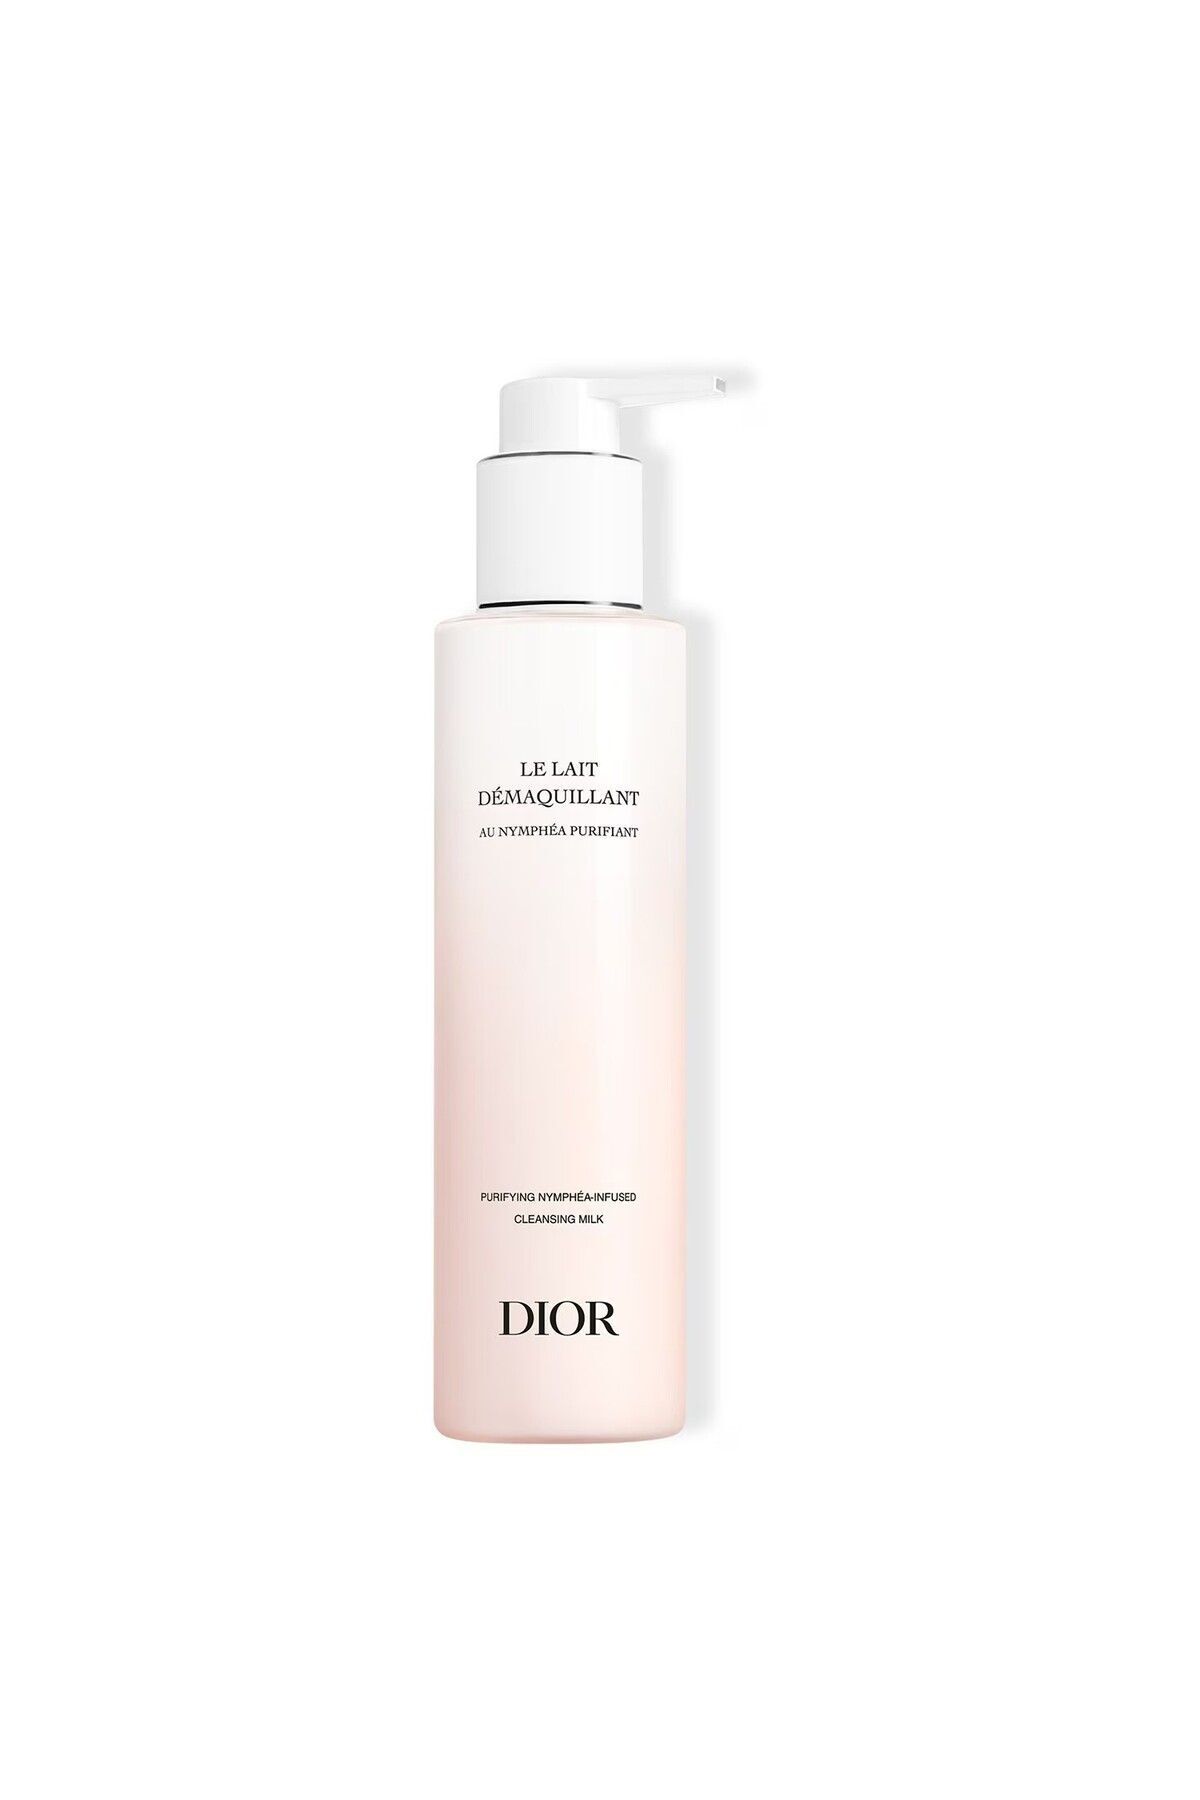 Dior PURİFYİNG MAKE-UP REMOVAL MİLK FOR EYES AND FACE 200 ML DEMBA2908